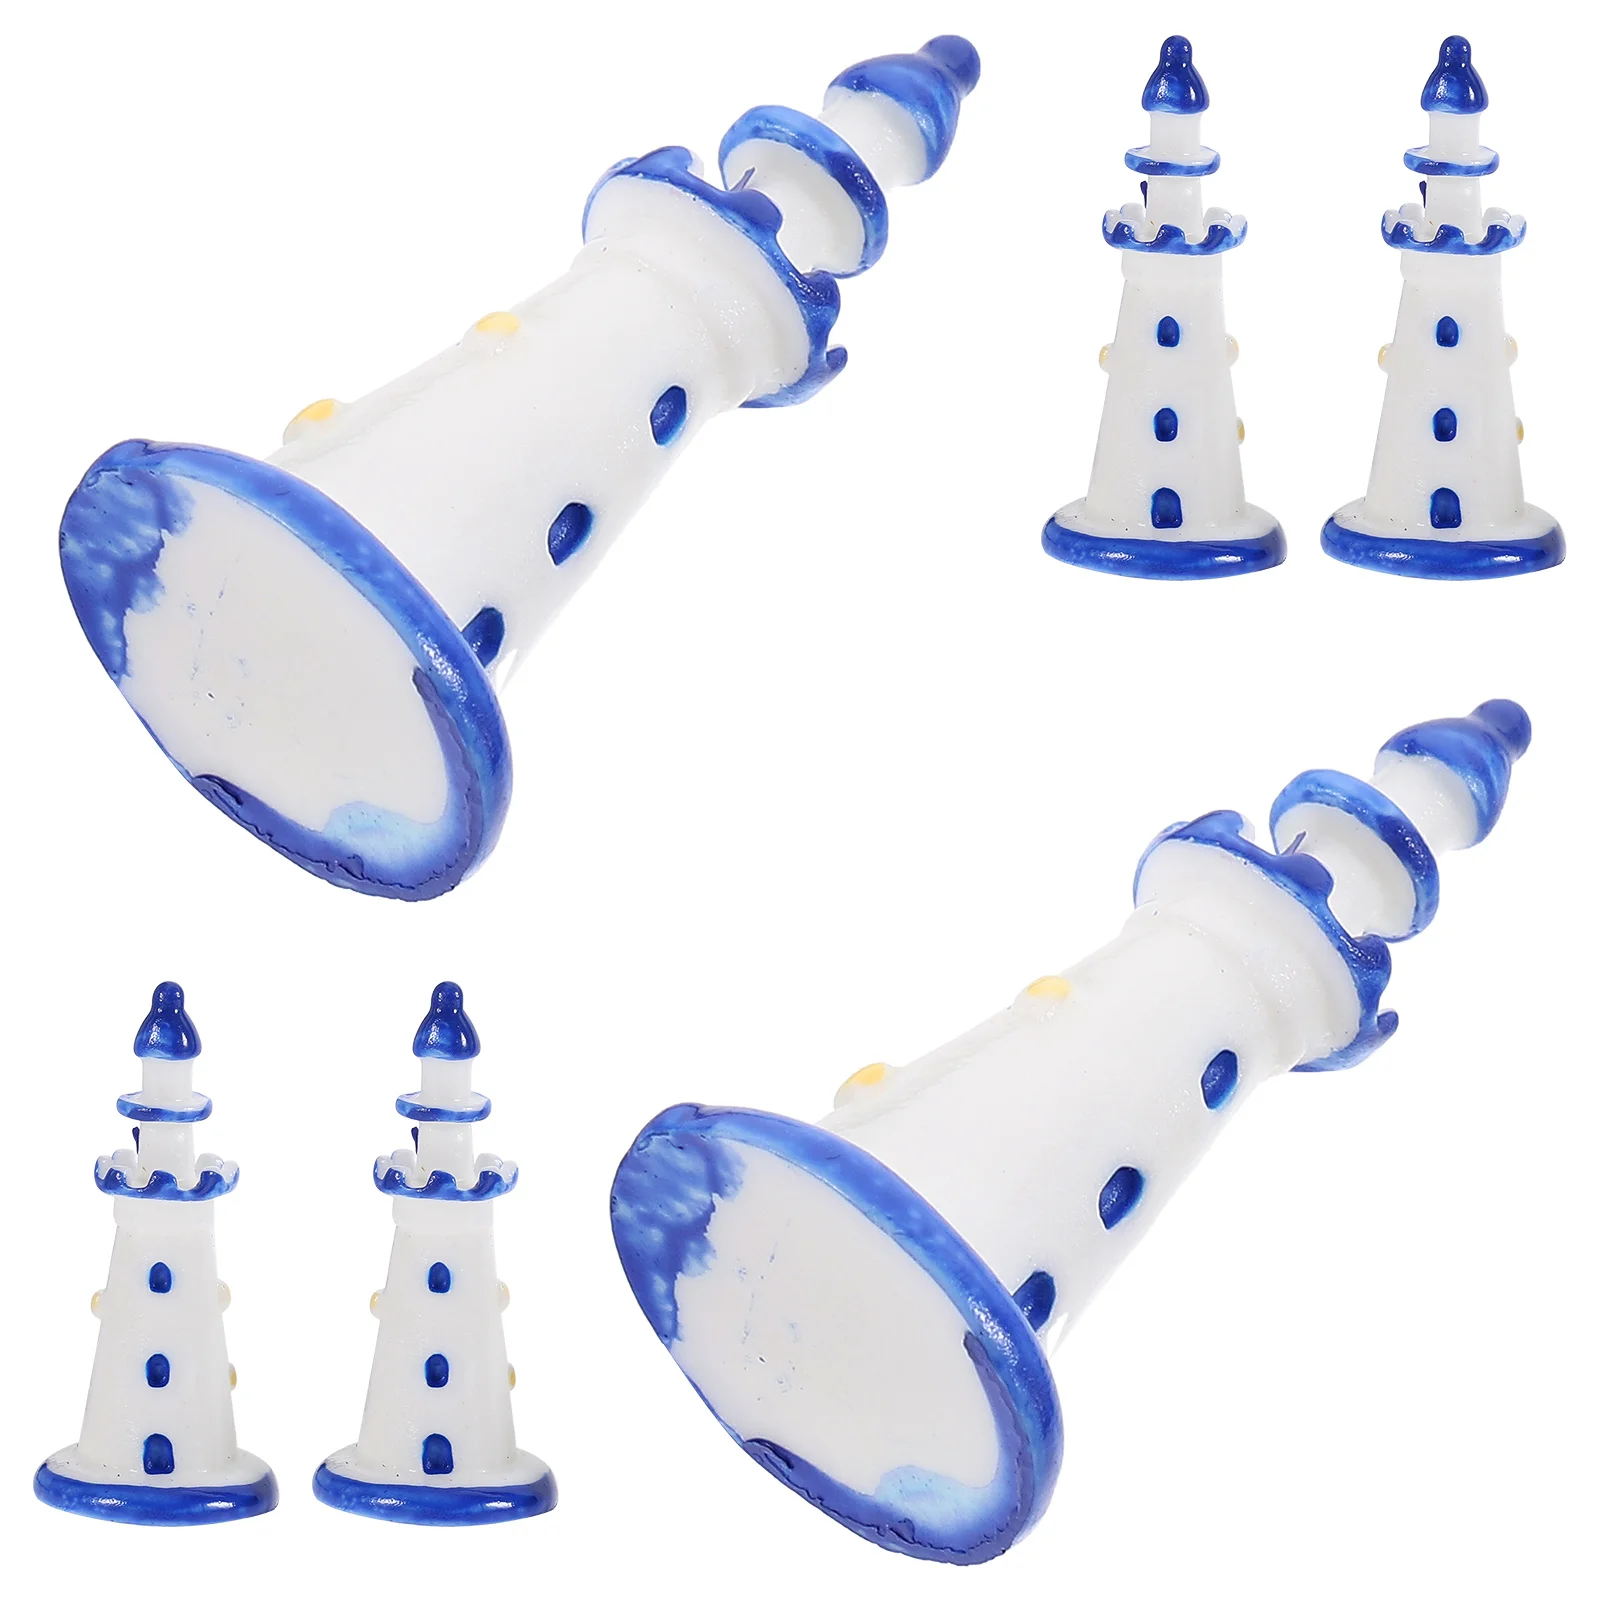 10 Pcs Household Mini Lighthouse Home Decor Scenery Decorations Resin Photography Props newborn baby photography props backdrop game boy knitting outfit headphone toys decorations fotografia studio shoots photo props